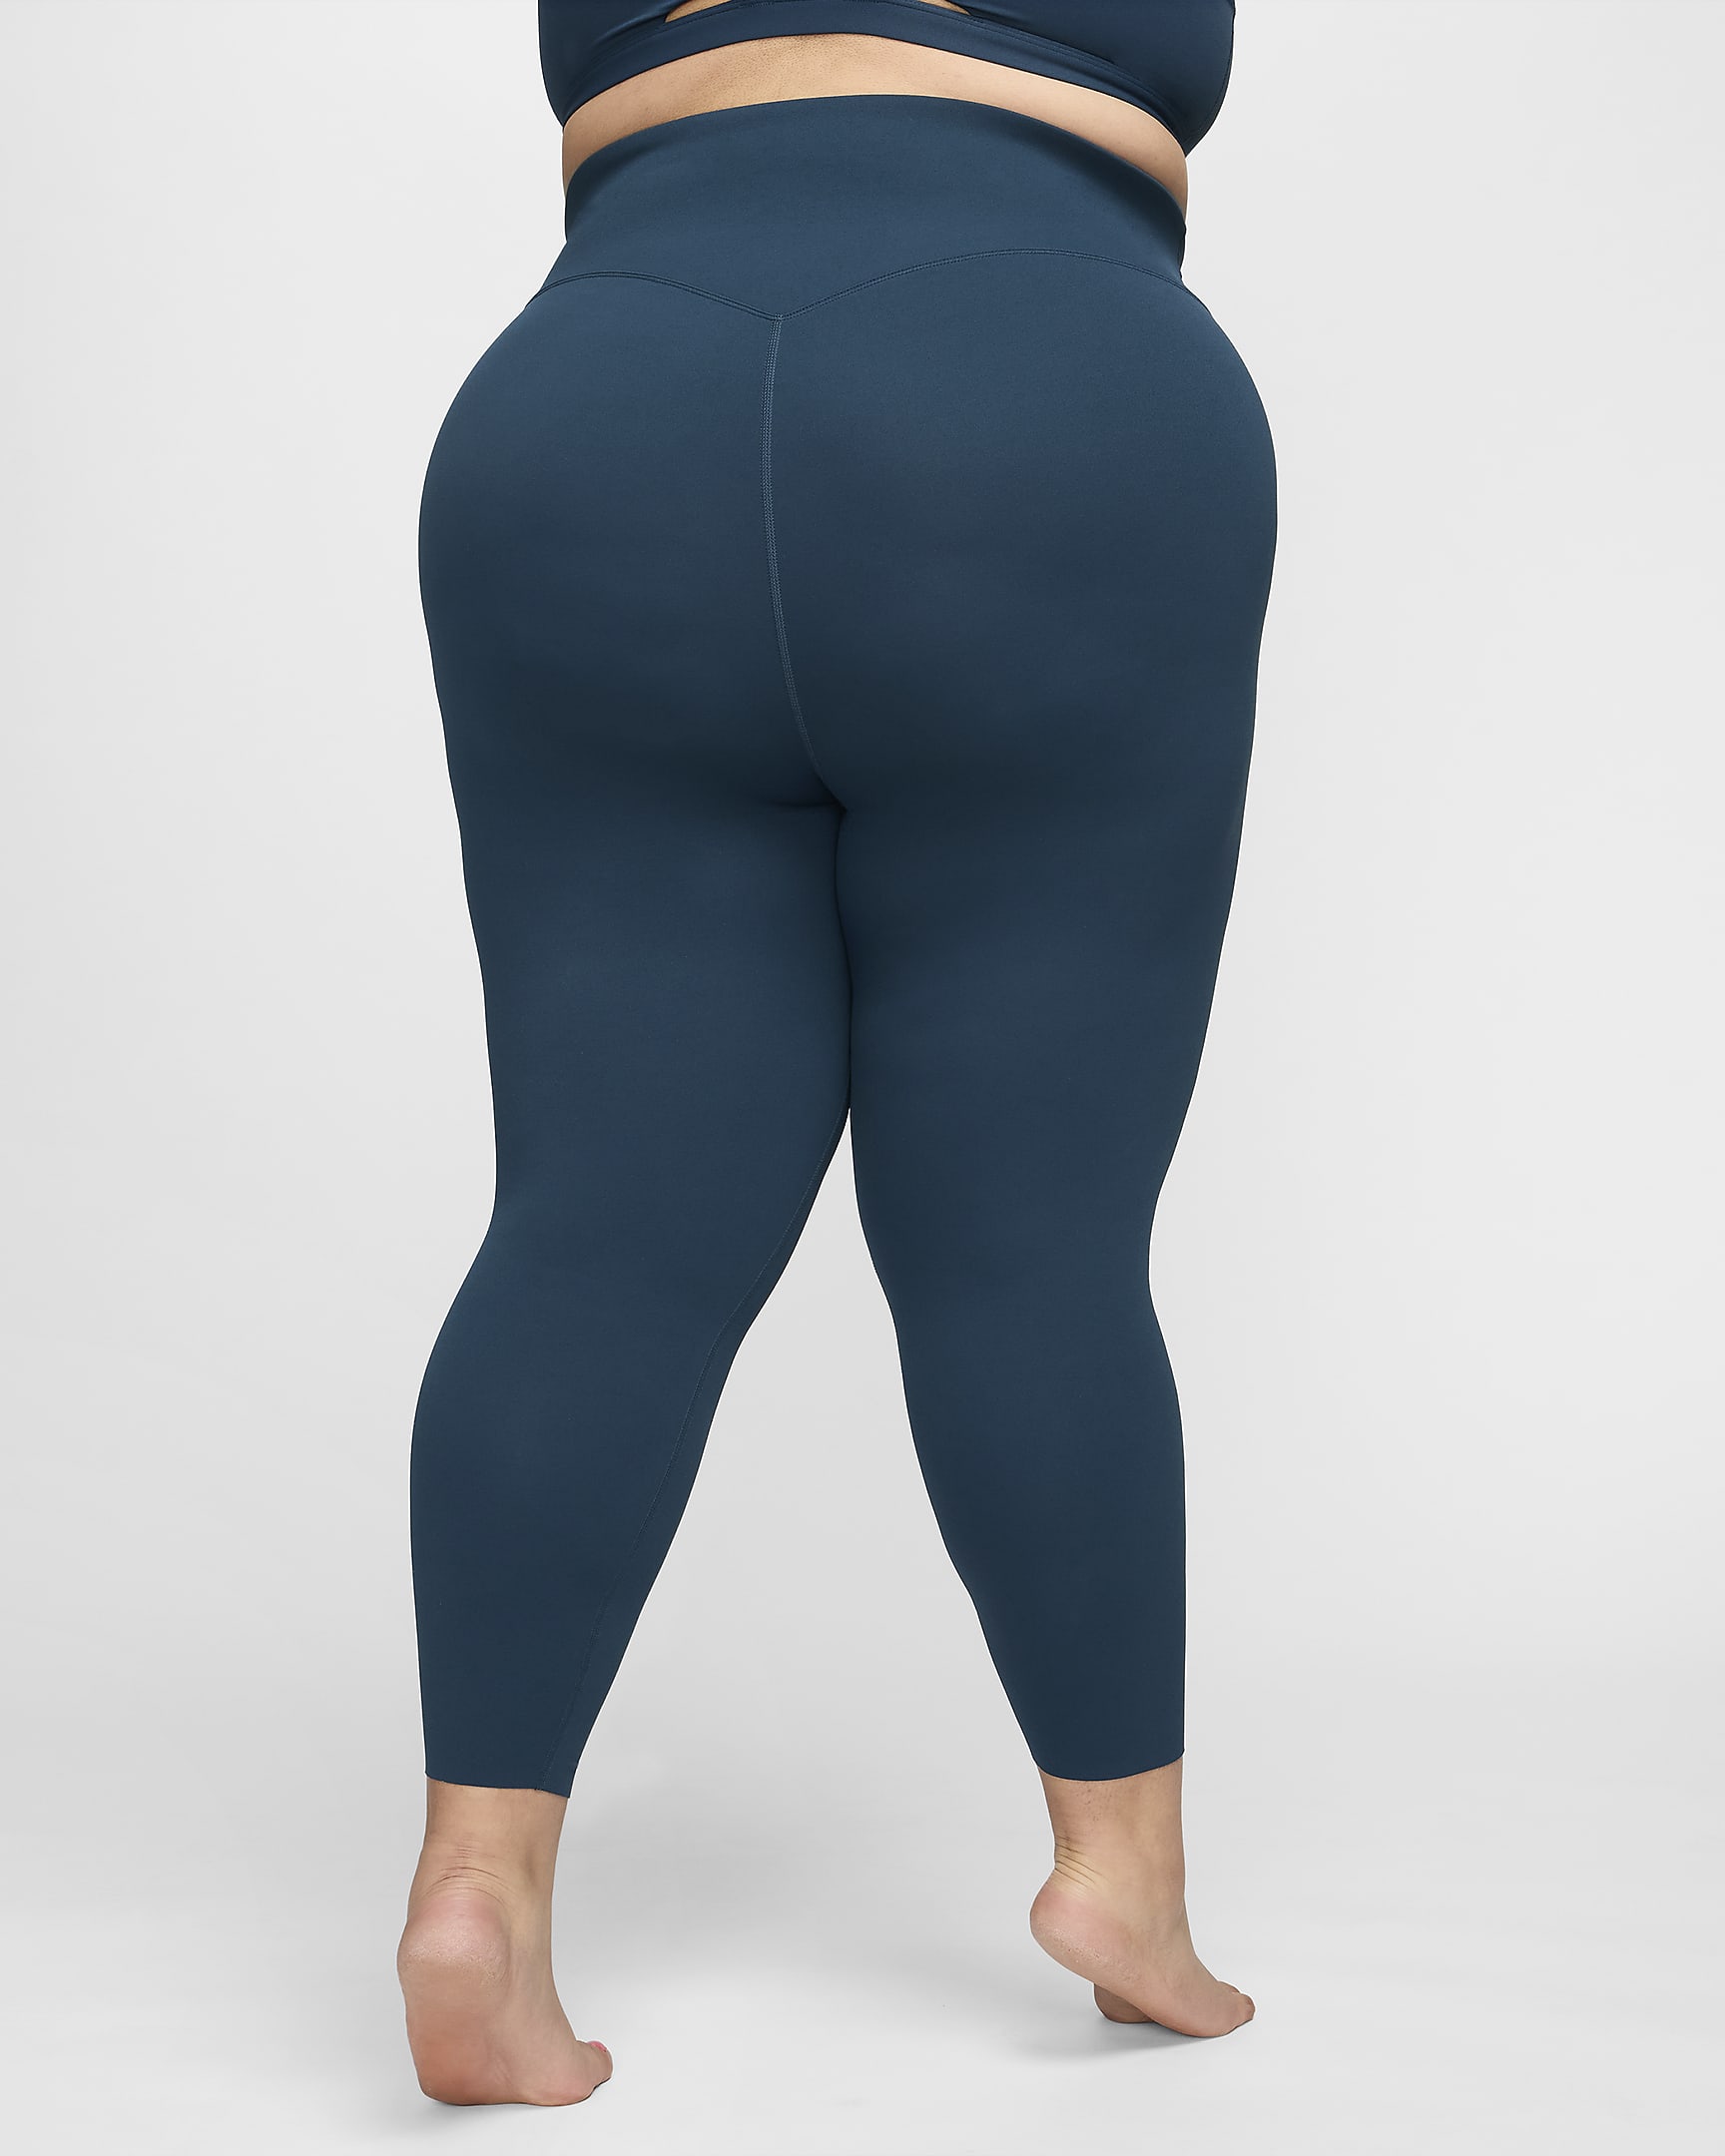 Nike Zenvy Women's Gentle-Support High-Waisted 7/8 Leggings (Plus Size) - Armoury Navy/Black